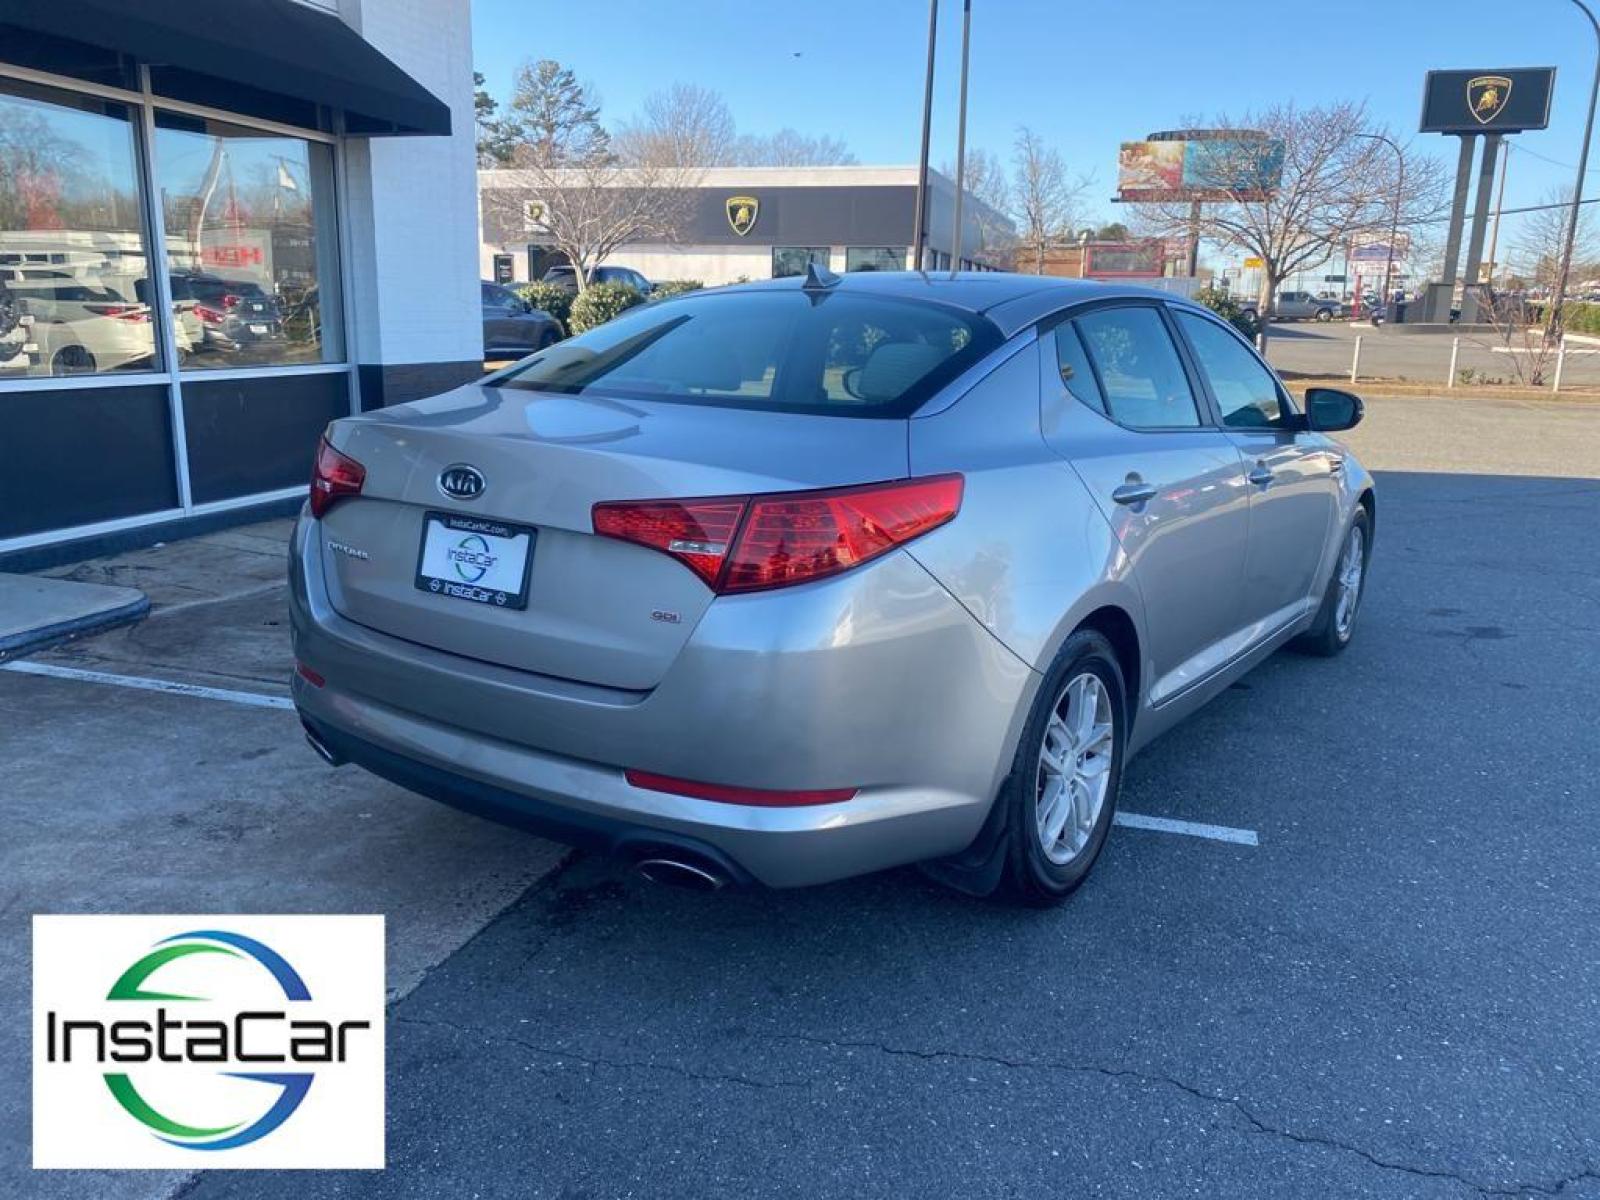 2012 Silver Kia Optima LX (KNAGM4A71C5) with an L4, 2.4L engine, Automatic transmission, located at 3147 E Independence Blvd, Charlotte, NC, 28205, 35.200268, -80.773651 - <b>Equipment</b><br>The Kia Optima features a hands-free Bluetooth phone system. This Kia Optima has satellite radio capabilities. This unit gleams with an elegant silver clear coated finish. Front wheel drive on the Kia Optima gives you better traction and better fuel economy. This mid-size car has - Photo #5